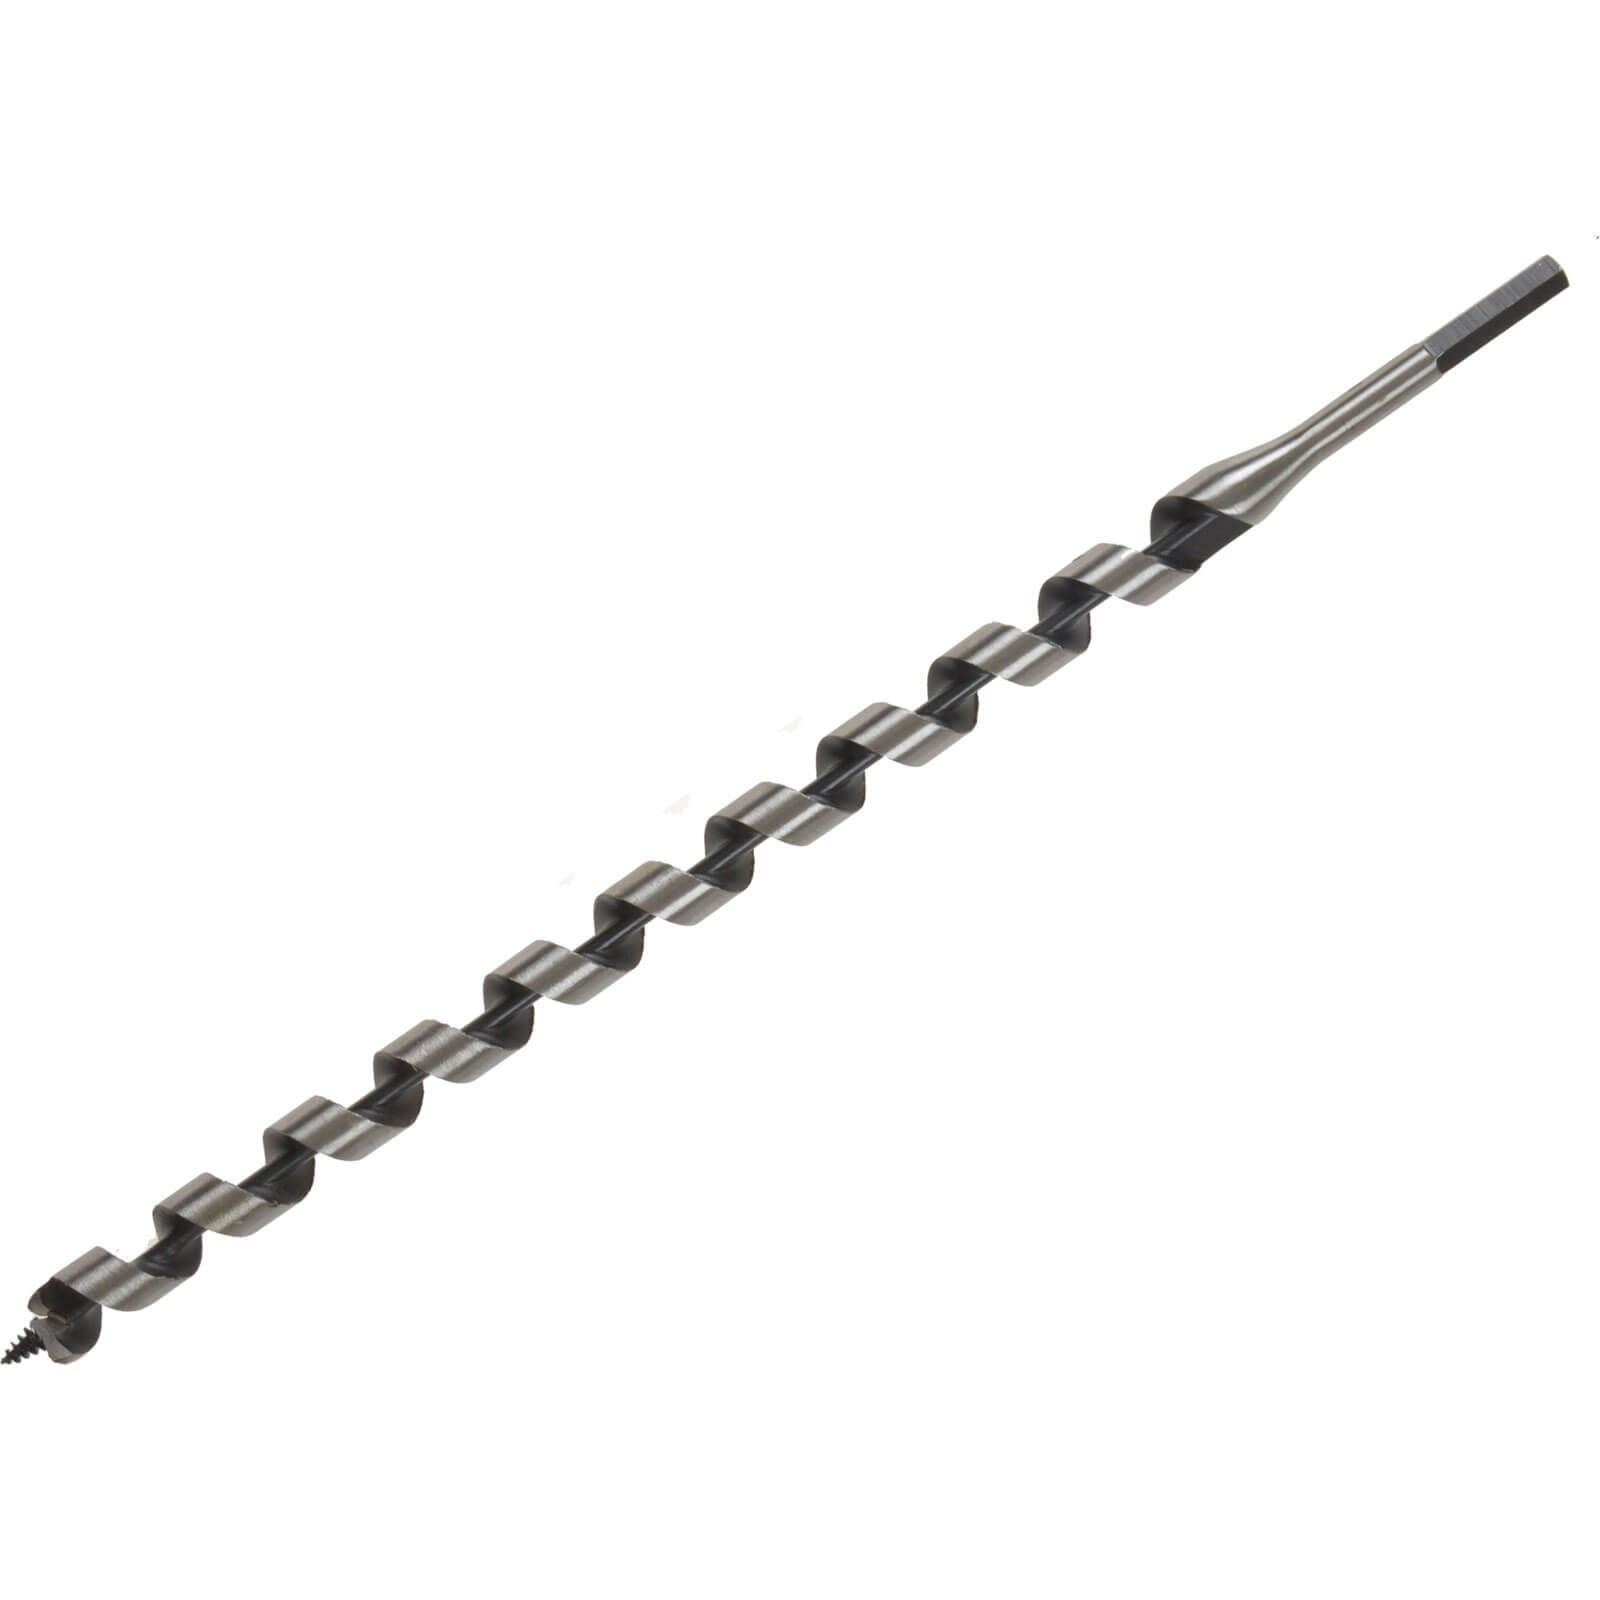 Image of Irwin Wood Auger Drill Bit 13mm 400mm